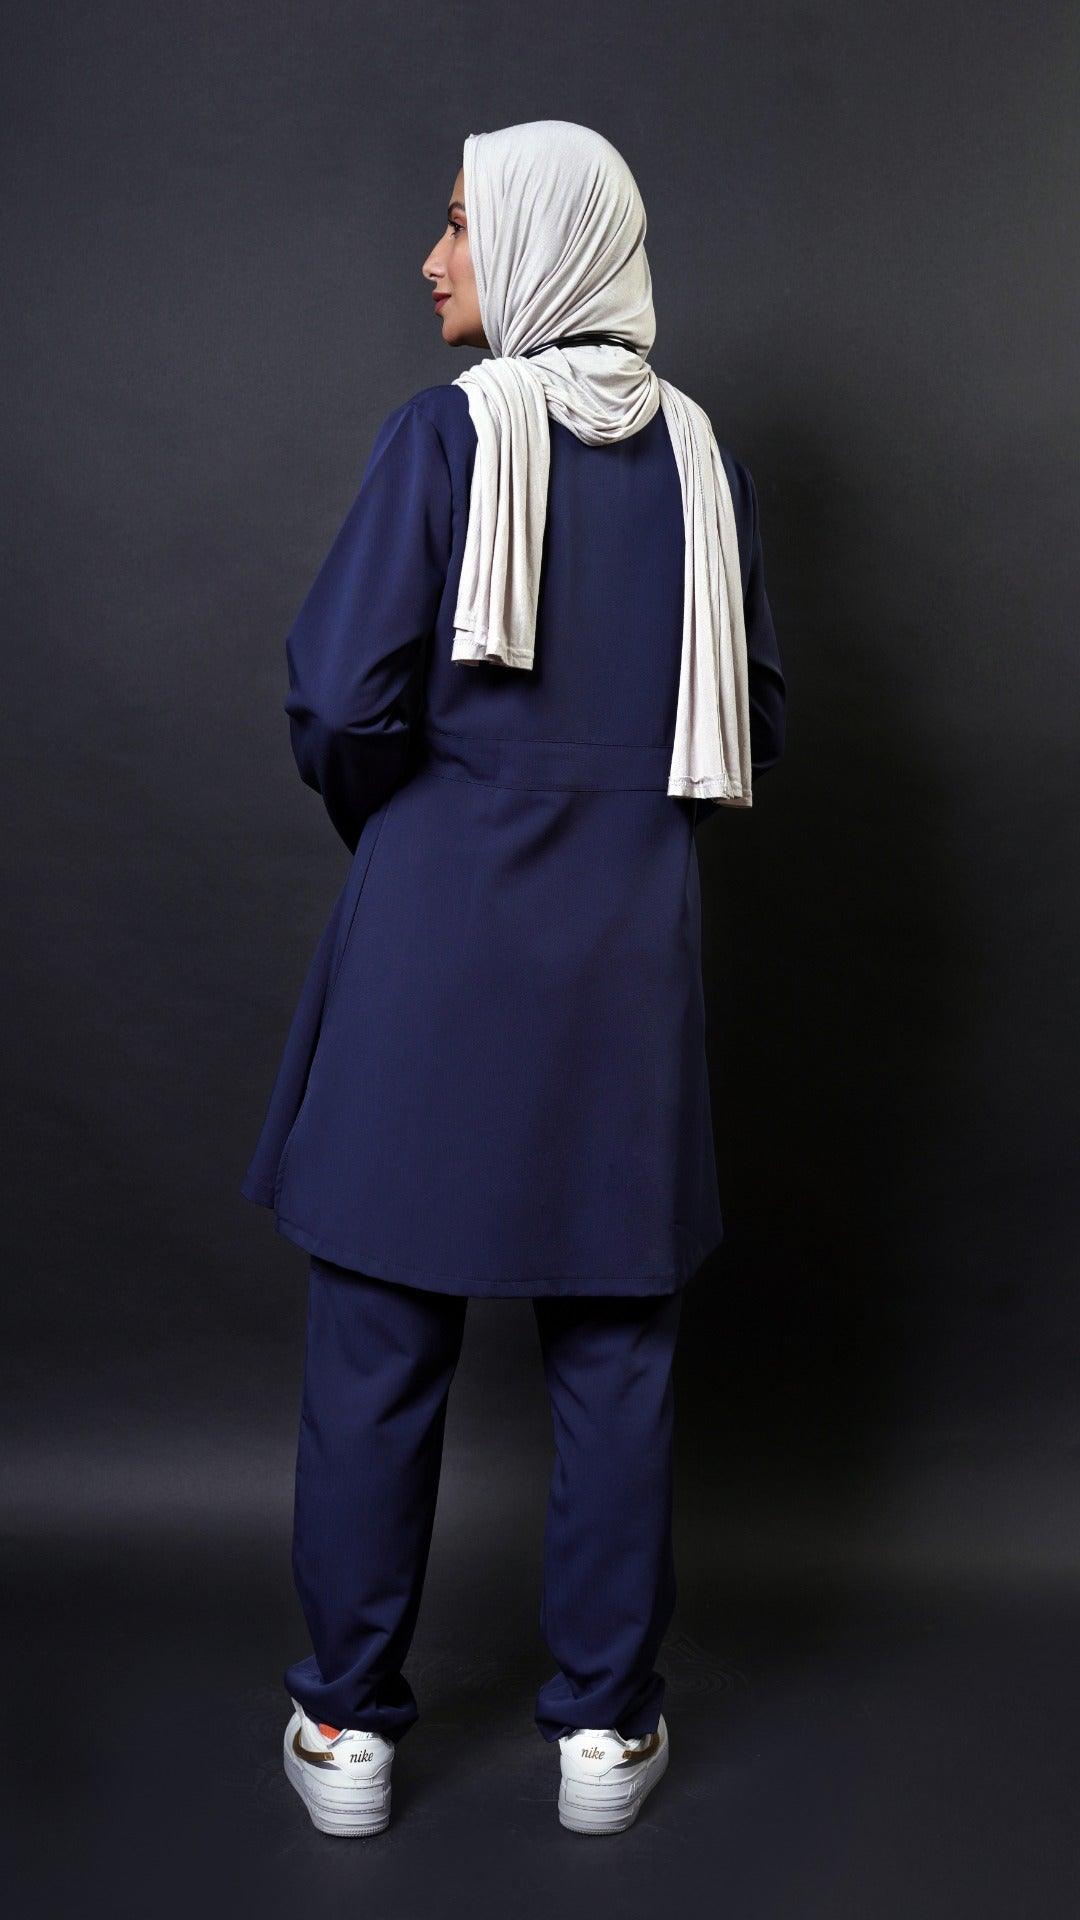  Extra long scrub top with long sleeves in navy blue perfect for women in healthcare! This top has a 36 inch length and flare top design for a modest look. It's also hijabi friendly, so you can feel comfortable and cover the lower bottom.